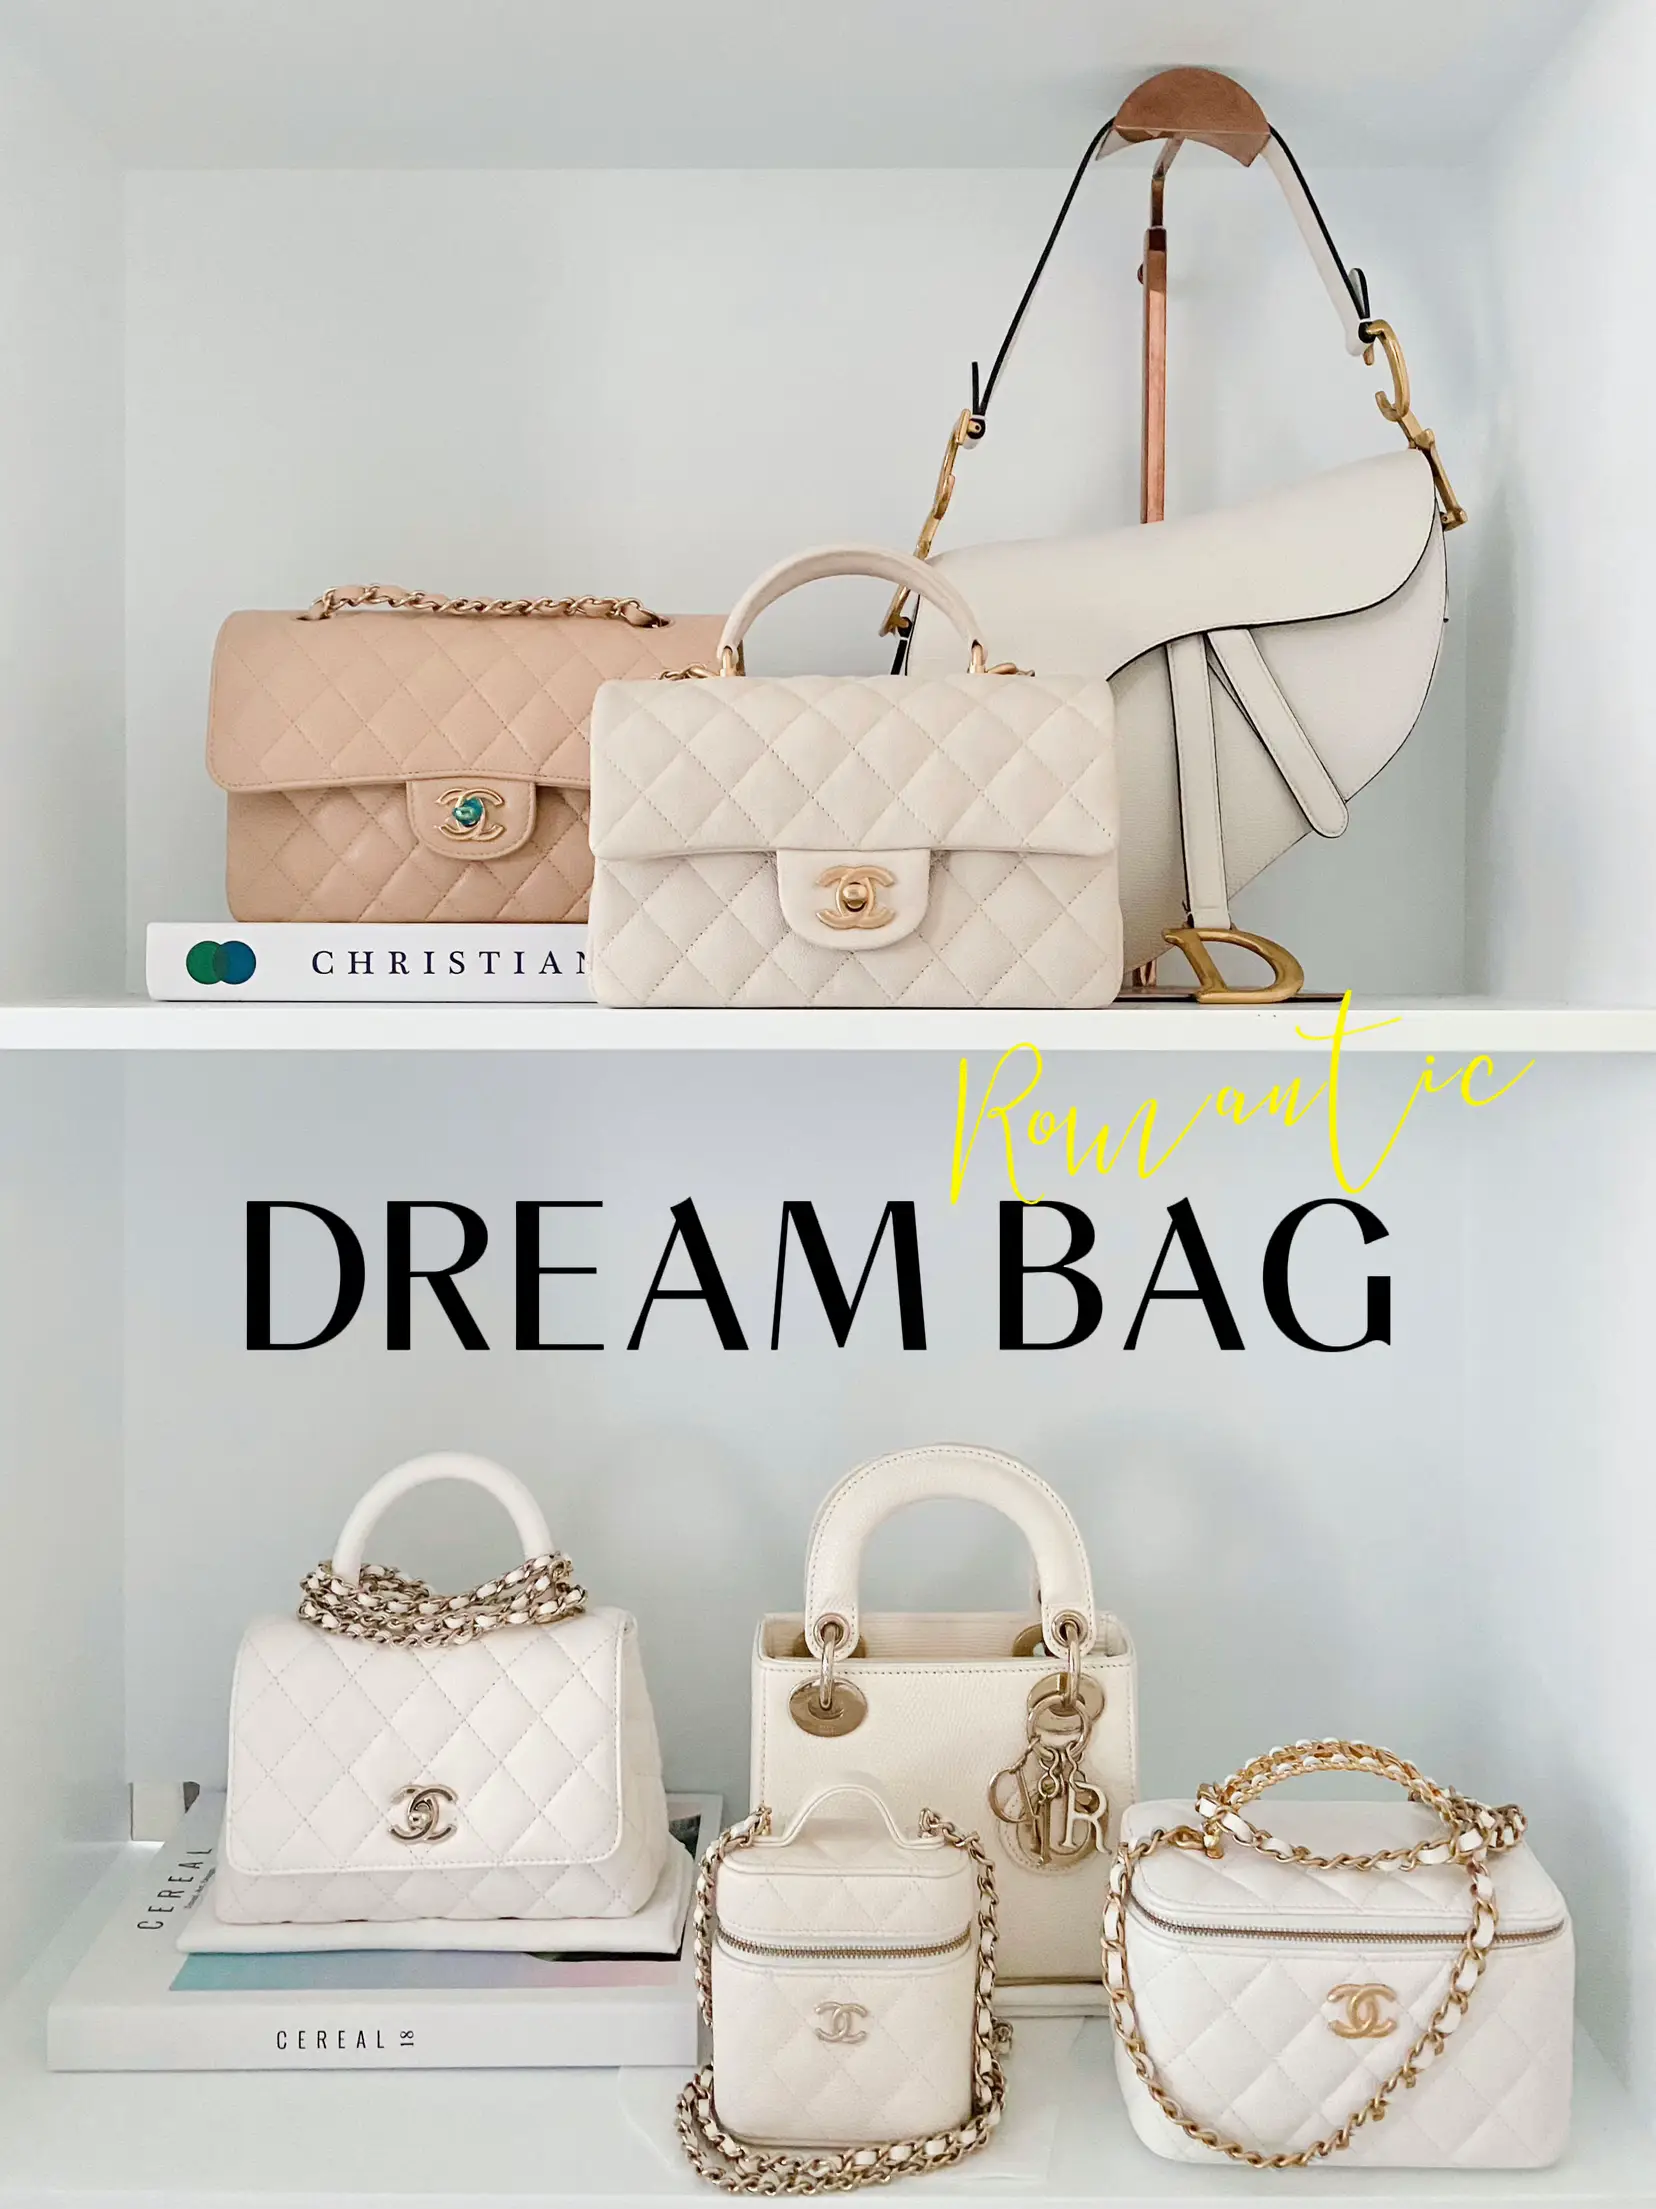 DREAM BAG, Gallery posted by Alexis